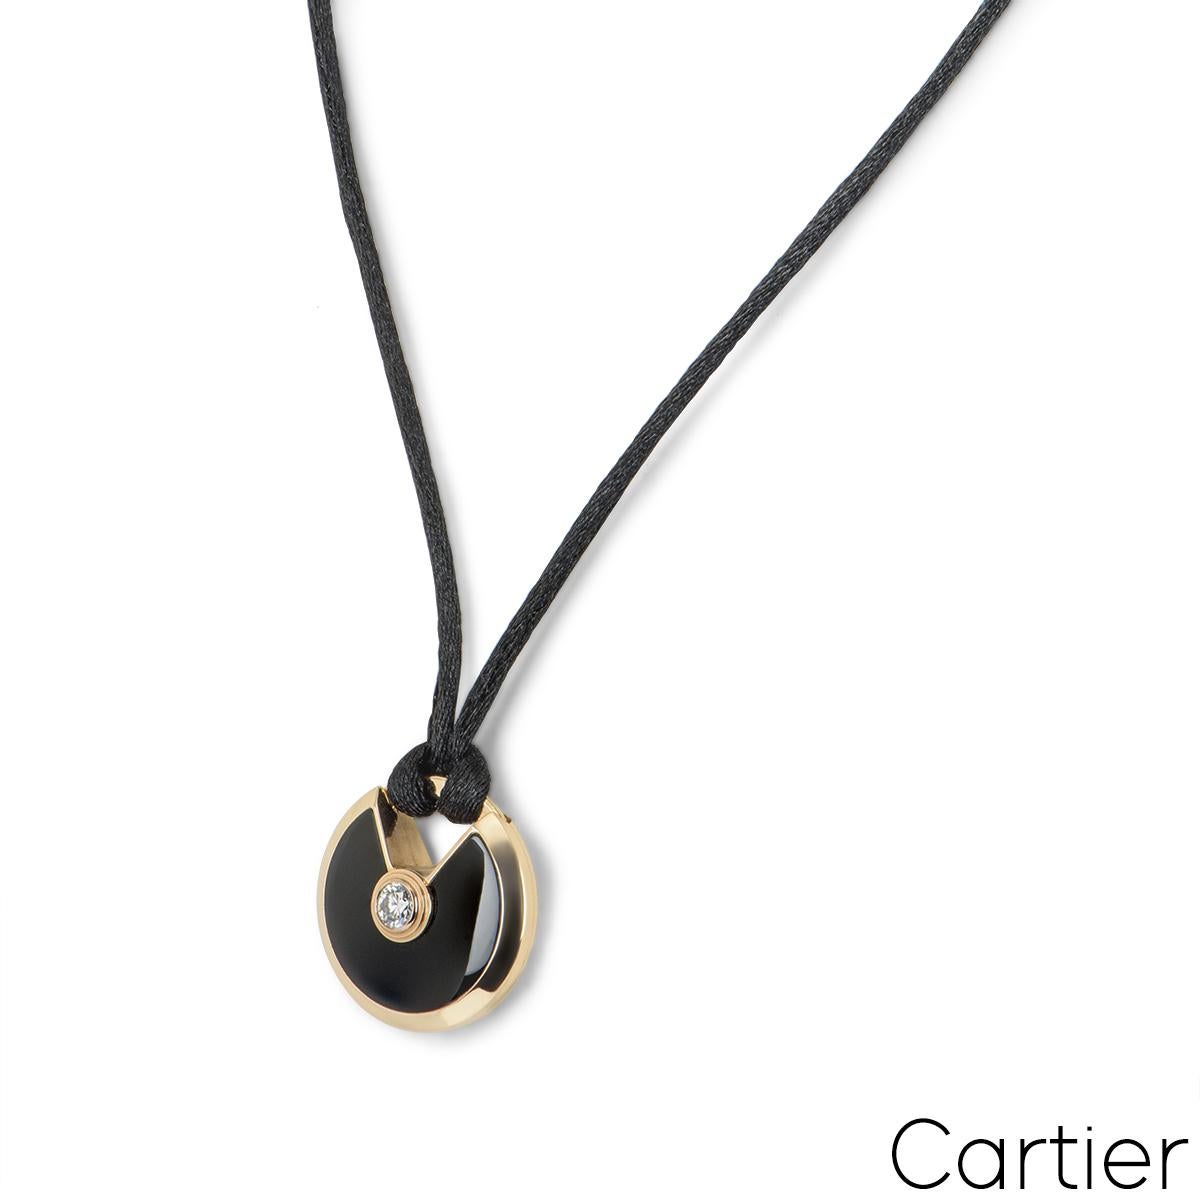 An 18k rose gold Cartier pendant from the Amulette de Cartier collection. The pendant comprises of a circular talisman, set with onyx and complemented by a single 0.09ct round brilliant cut diamond, in a rub over setting. The talisman is suspended